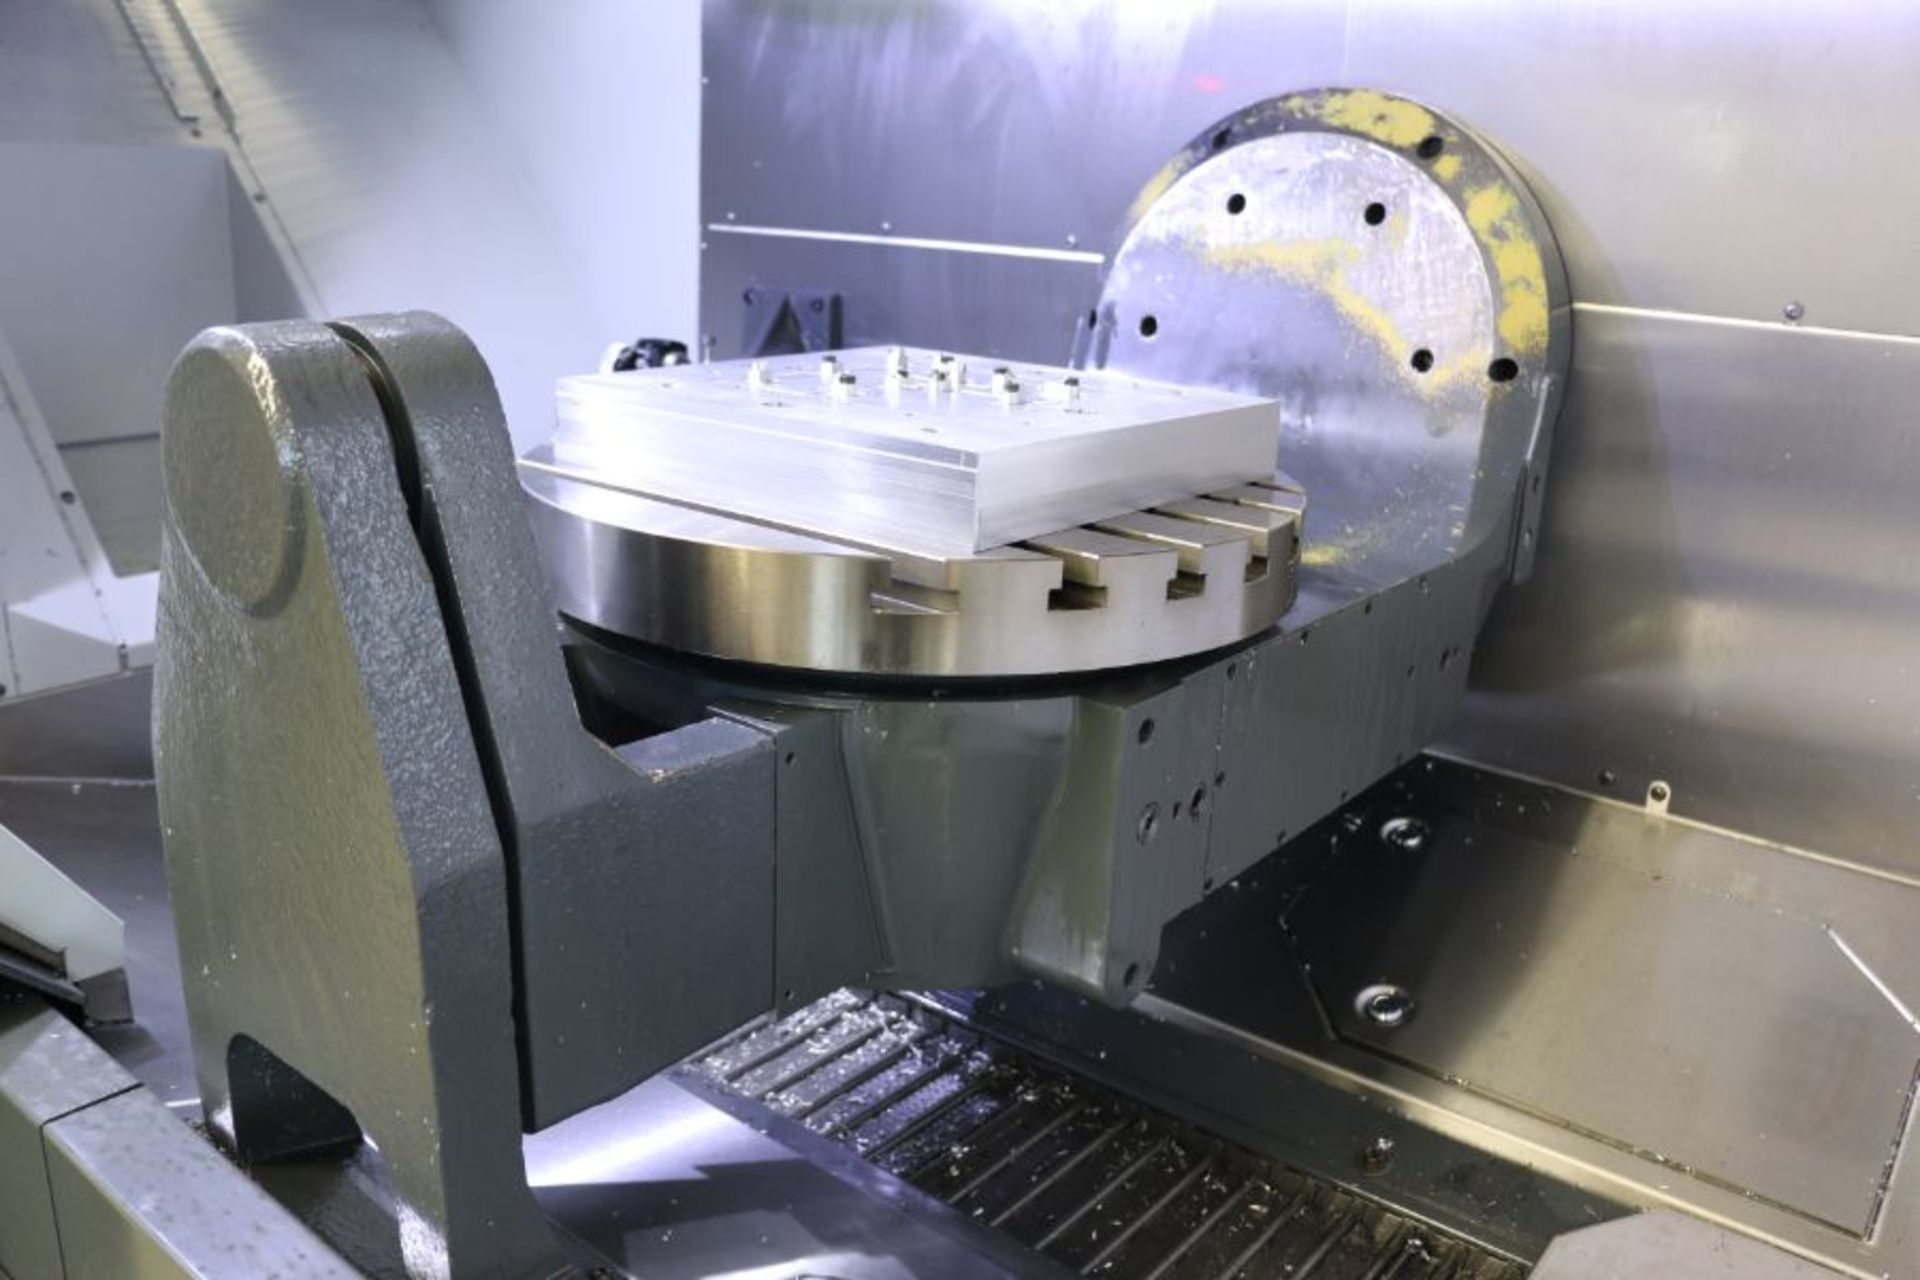 2018, Haas UMC-750SS 5 Axis VMC, round table, 12K RPM, 40 ATC, CT 40, Probe, CC, 1975 Hrs. - Image 9 of 15